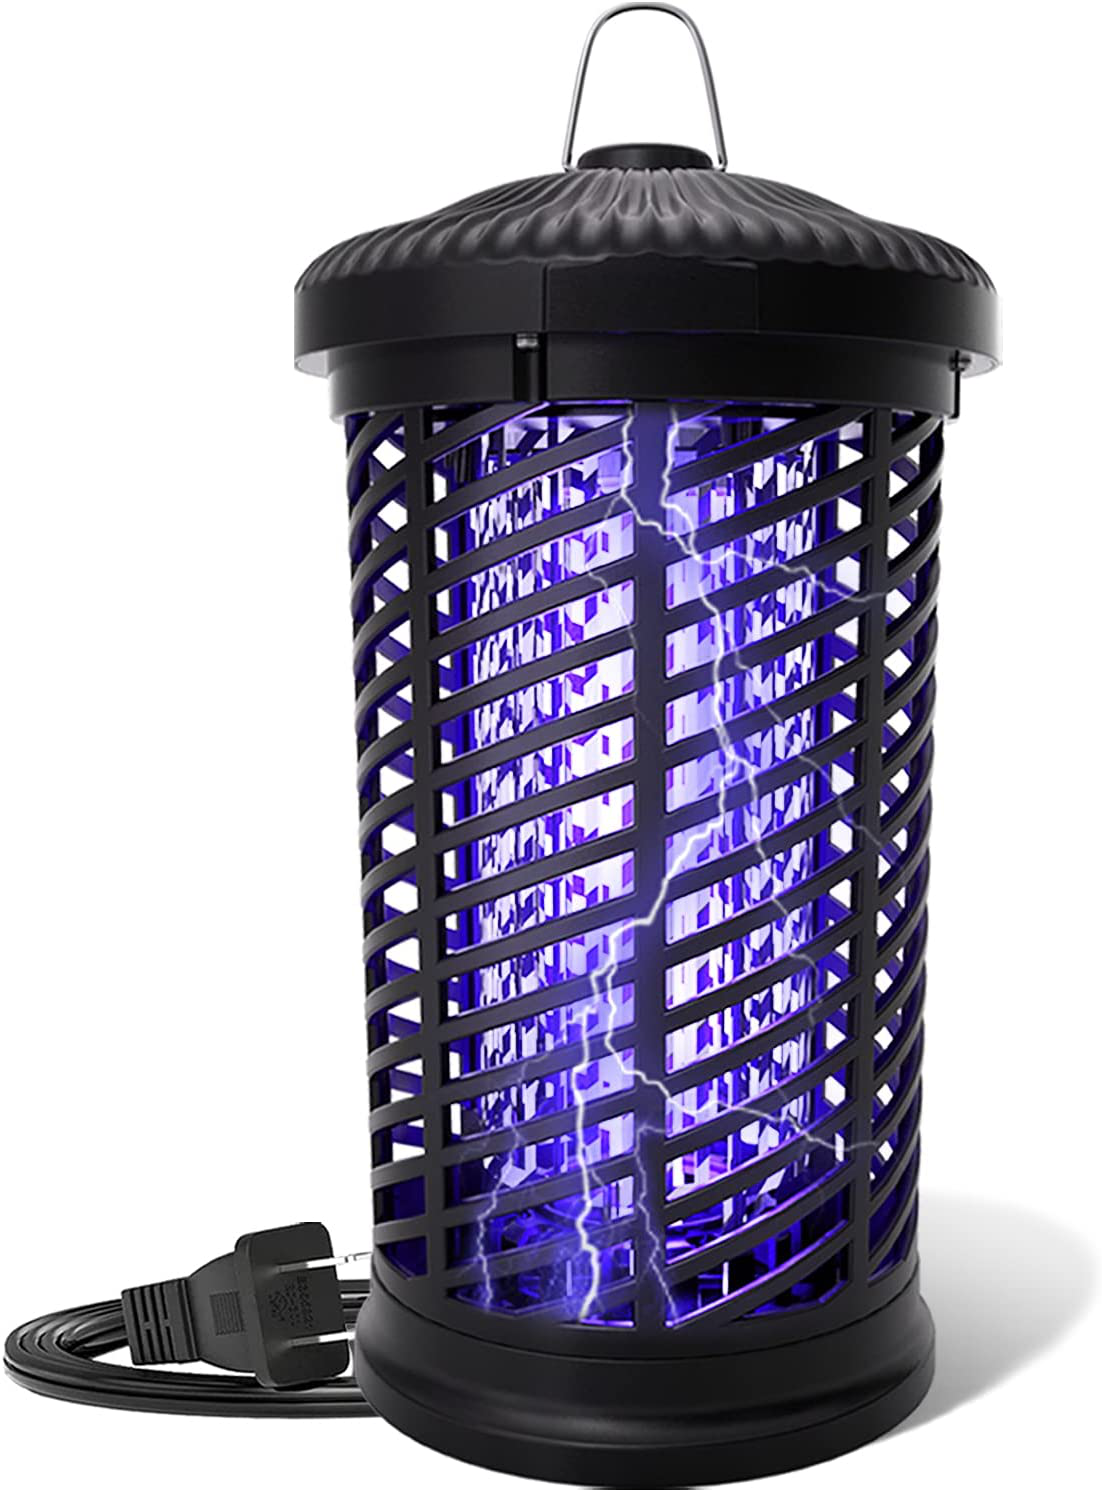 Electric Bug Zapper, Mosquito Zapper Outdoor/Indoor, 4200V Waterproof Fly Insect Trap Repellent, Mosquito Killer for Home, Patio, Backyard